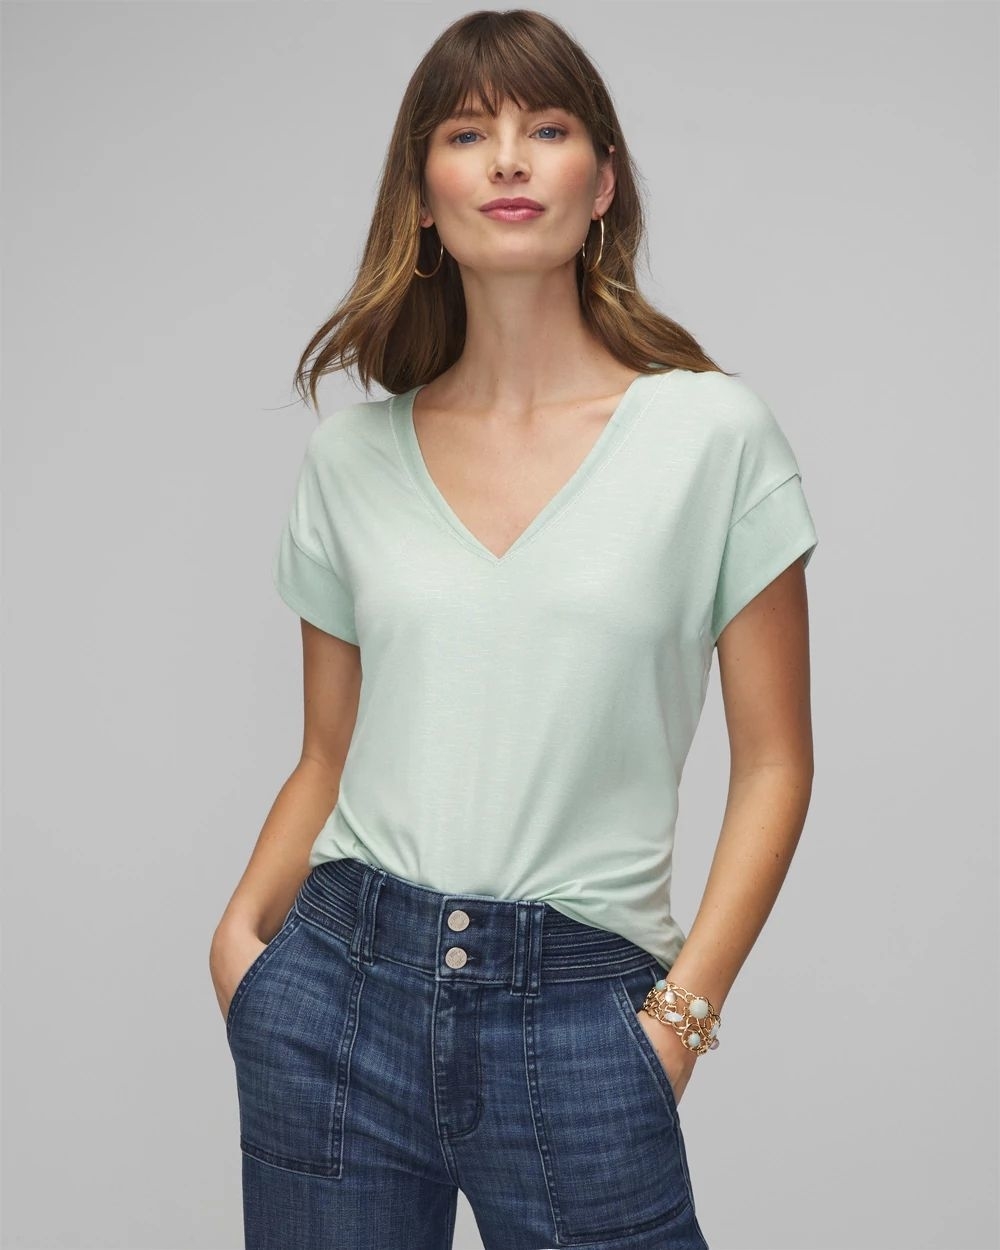 Woman in a V-neck top and high-waisted jeans posing for a shopping article